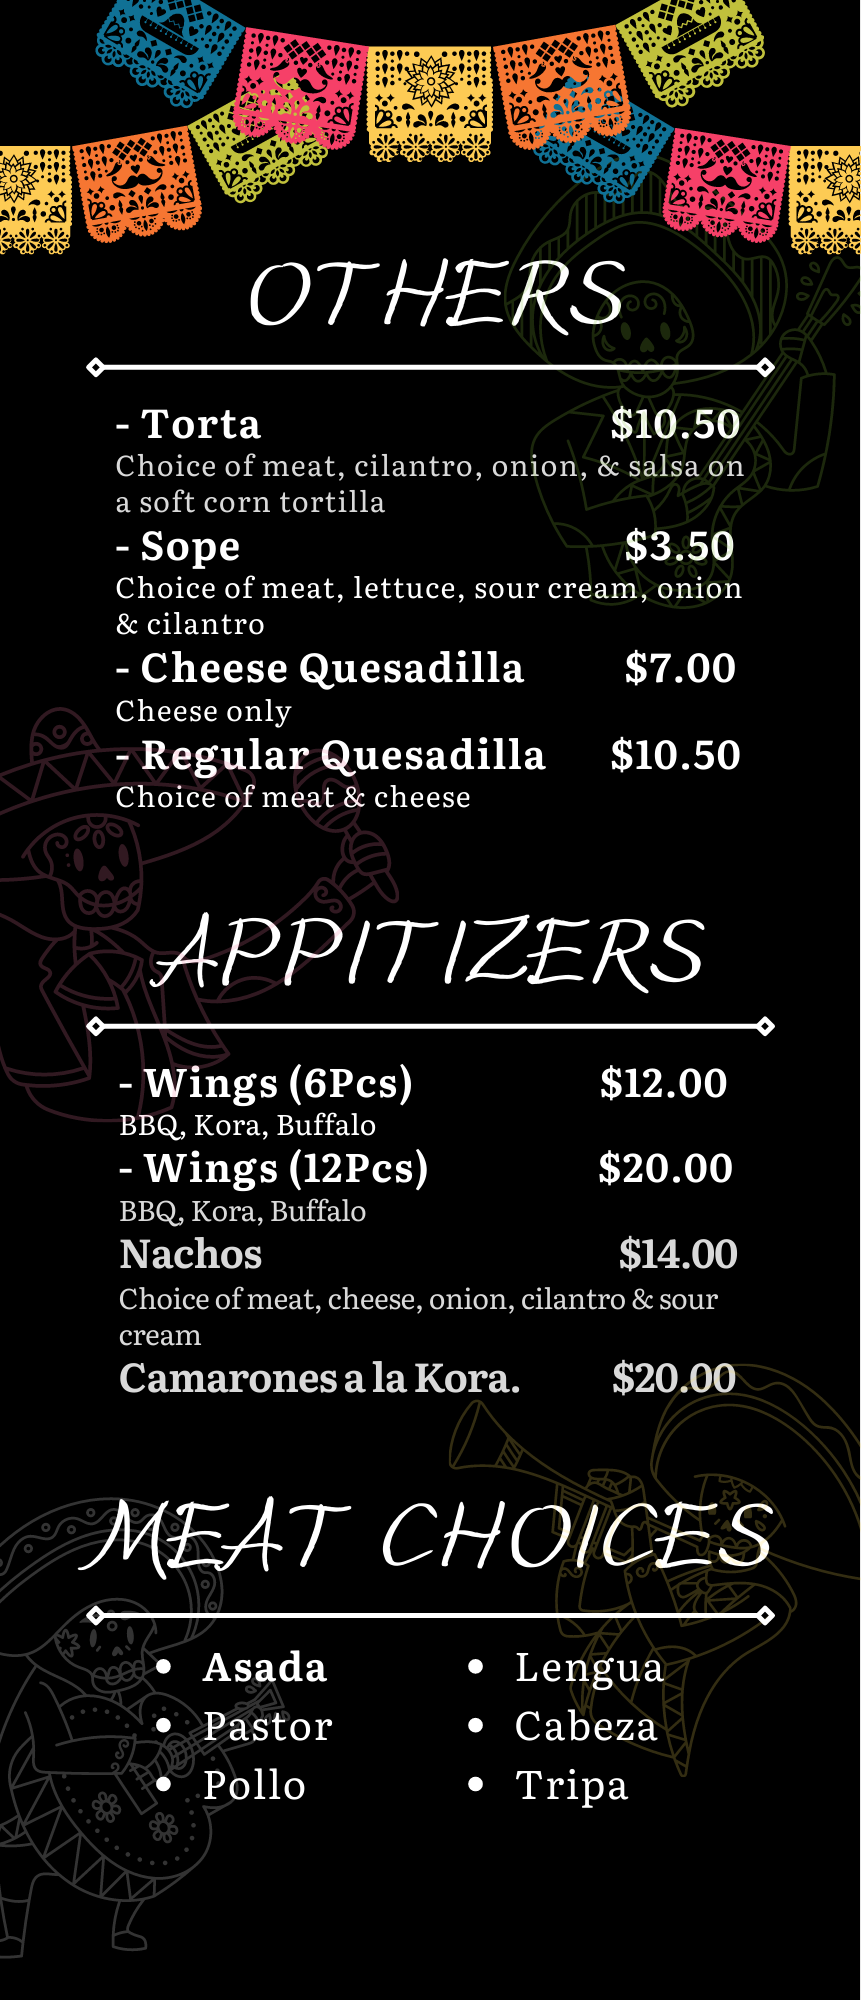 a menu for a restaurant shows appetizers and meat choices .